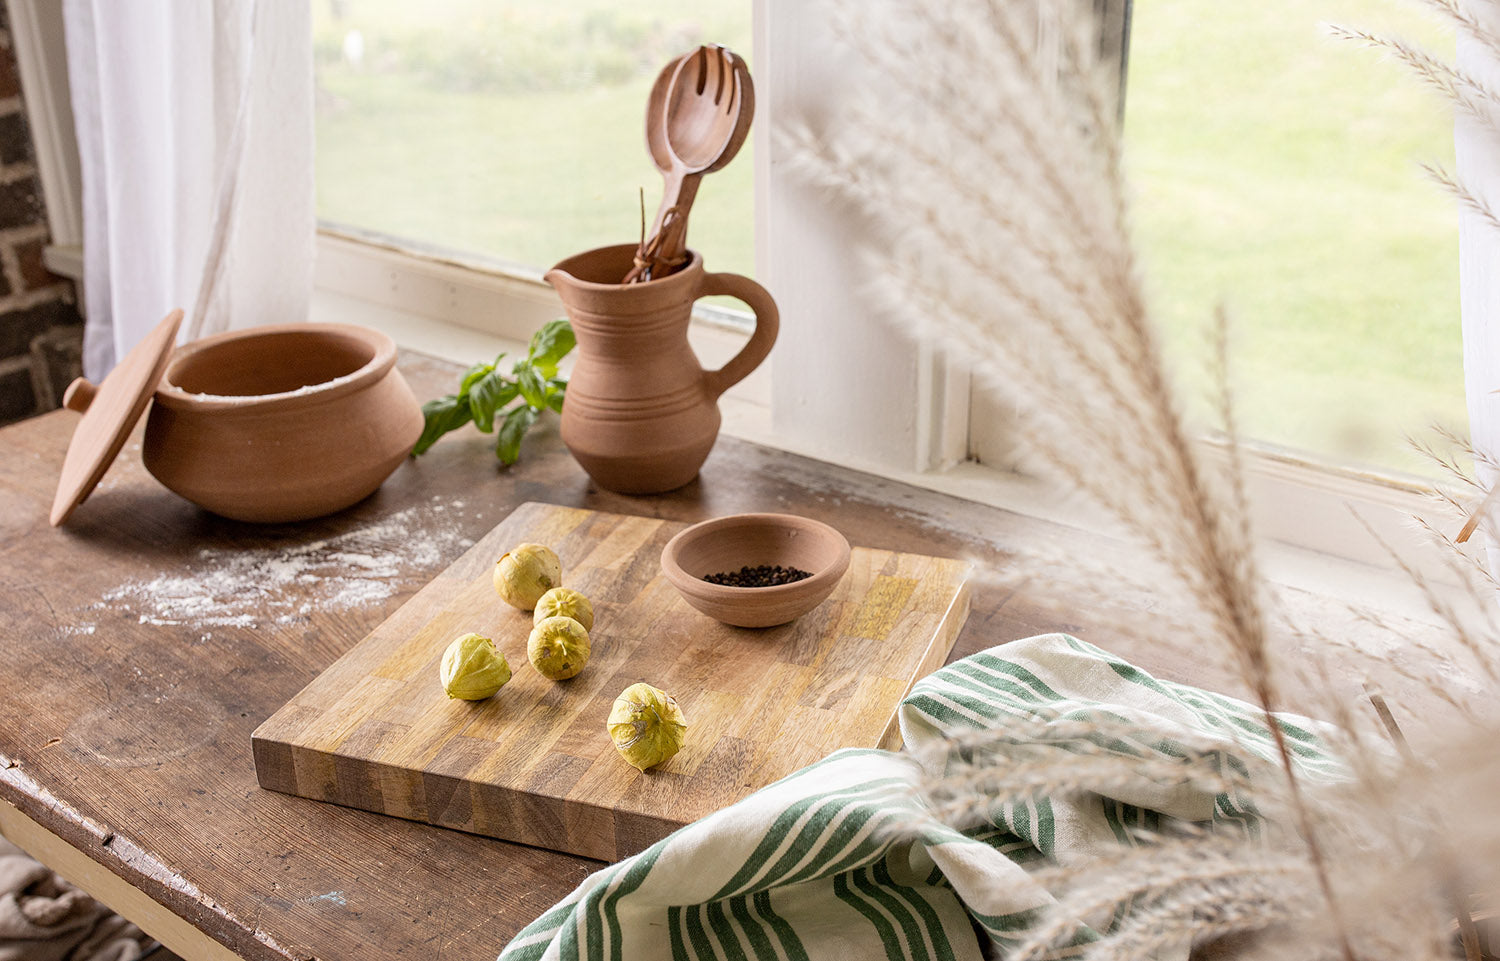 end grain cutting board on table with terracotta pitcher, pot and small bowl